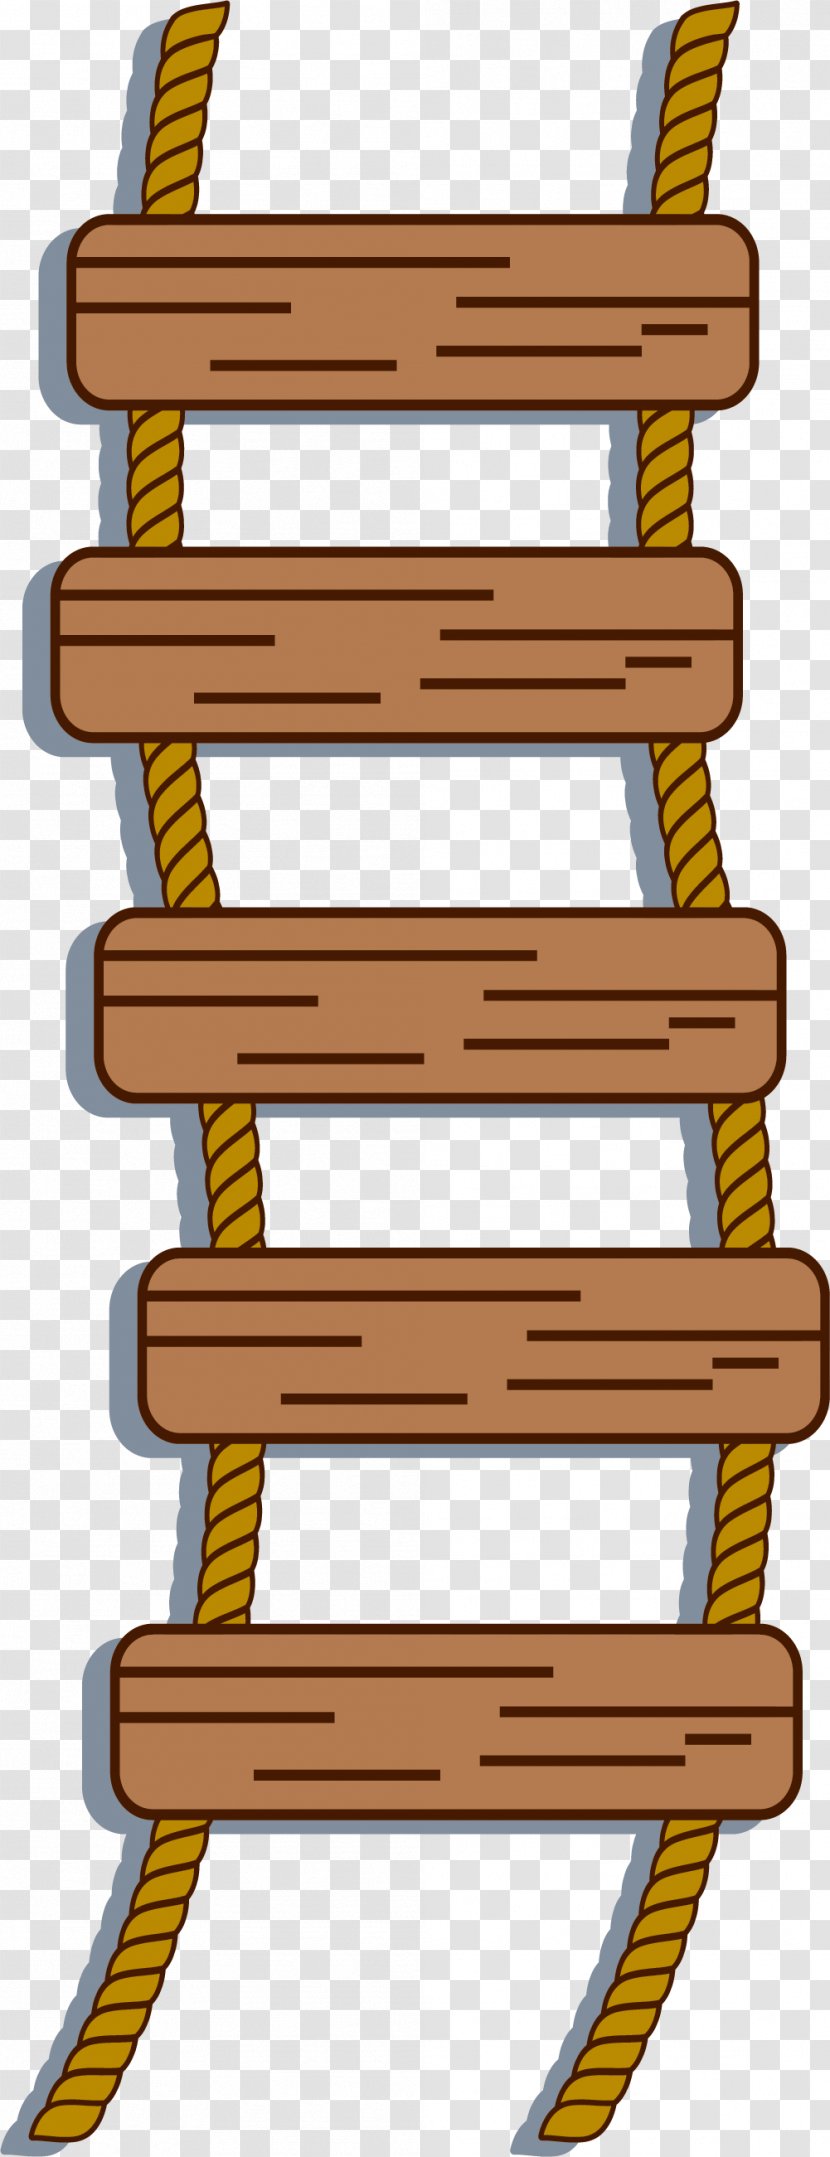 Ladder Rope - Coffee Straight Transparent PNG